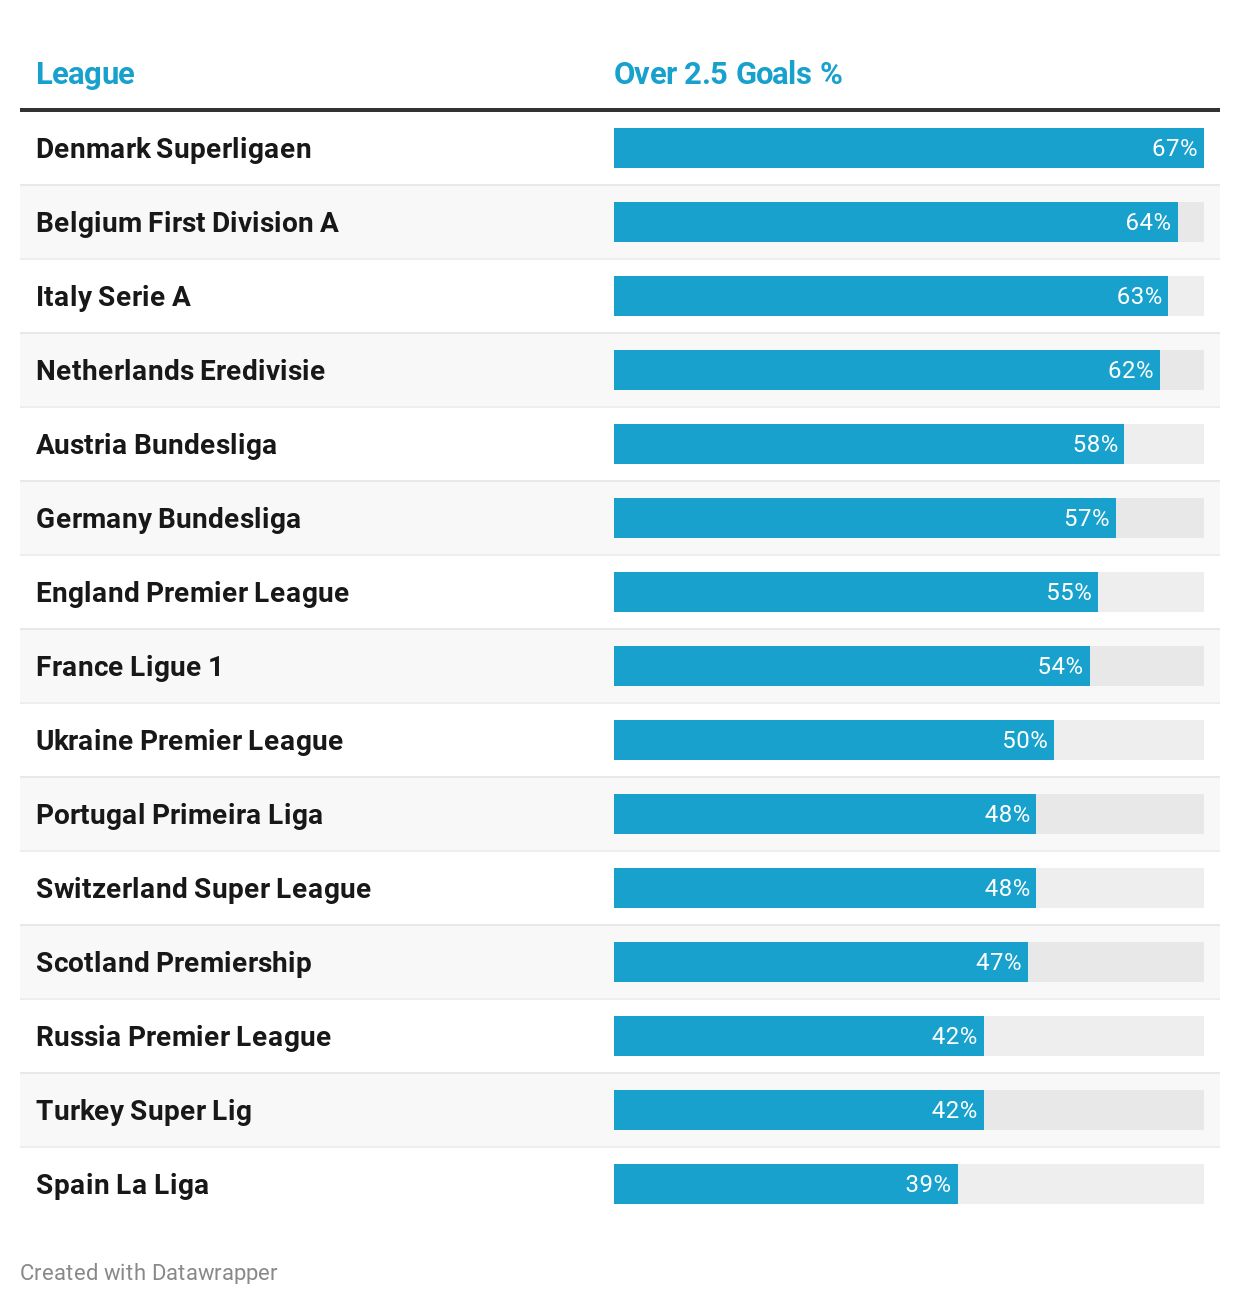 Football Stats - Best Teams and Leagues For BTTS, Over/Under 2.5